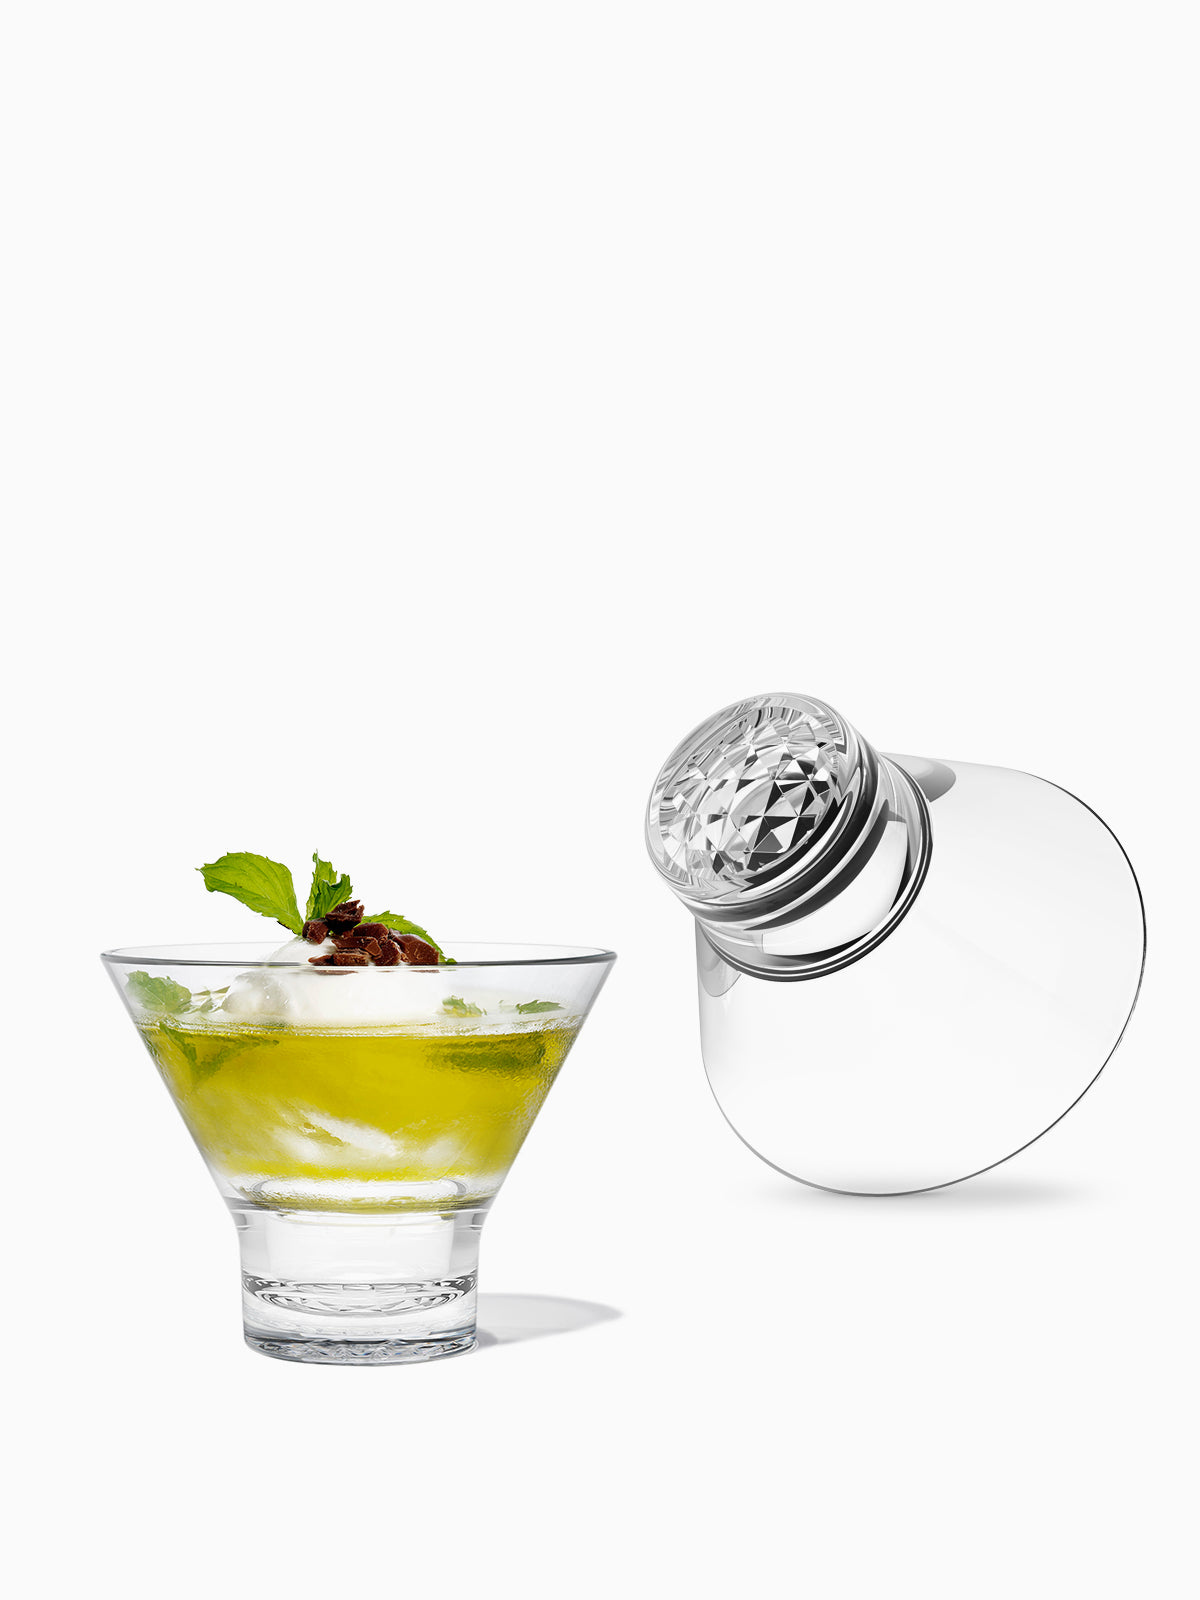 Cork Pops Ice Free Stainless Steel Martini Glass